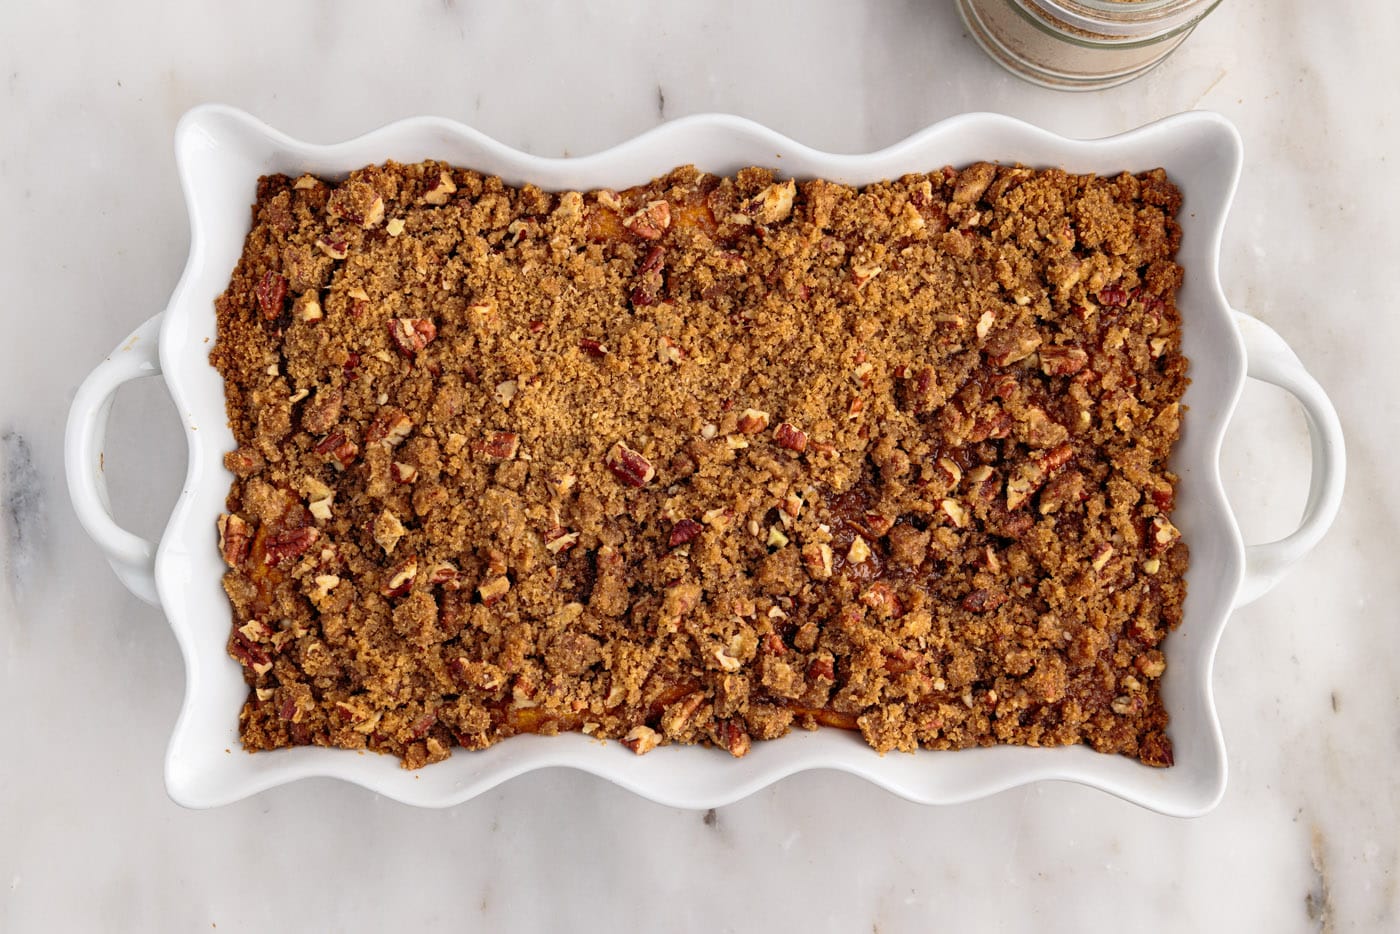 baked sweet potato souffle with pecan streusel crumble